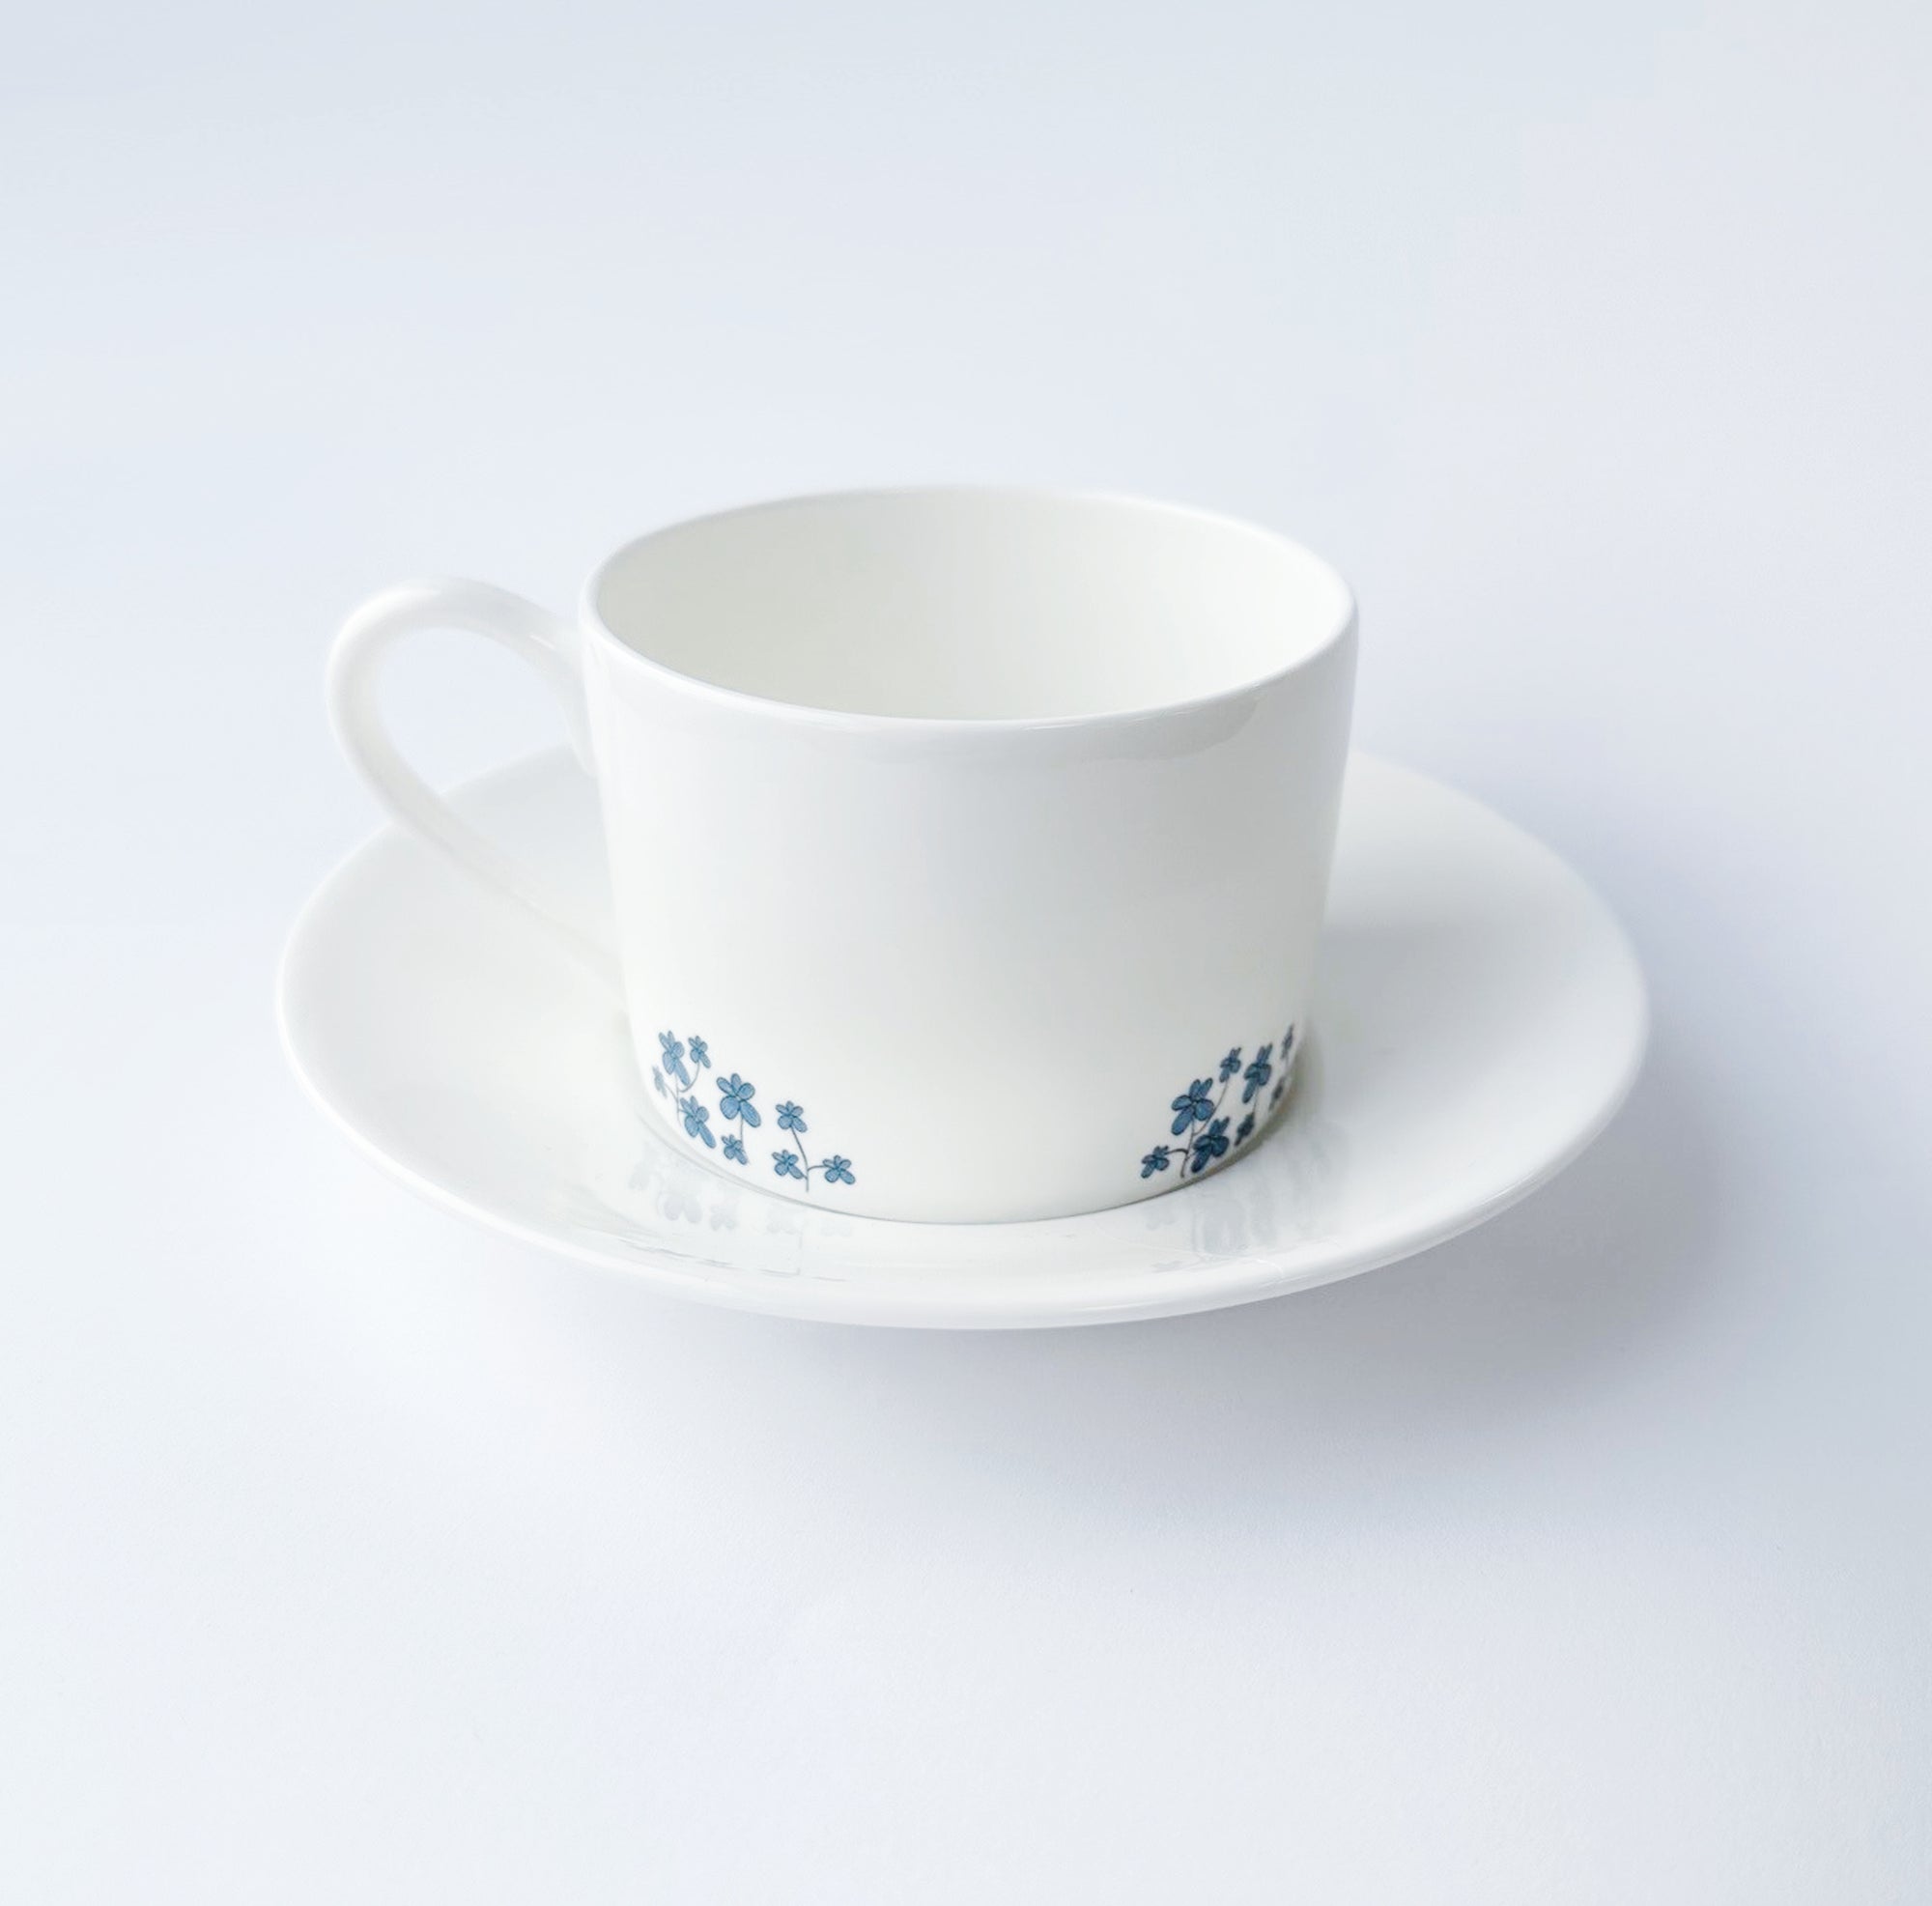 Forget-me-not cup and saucer